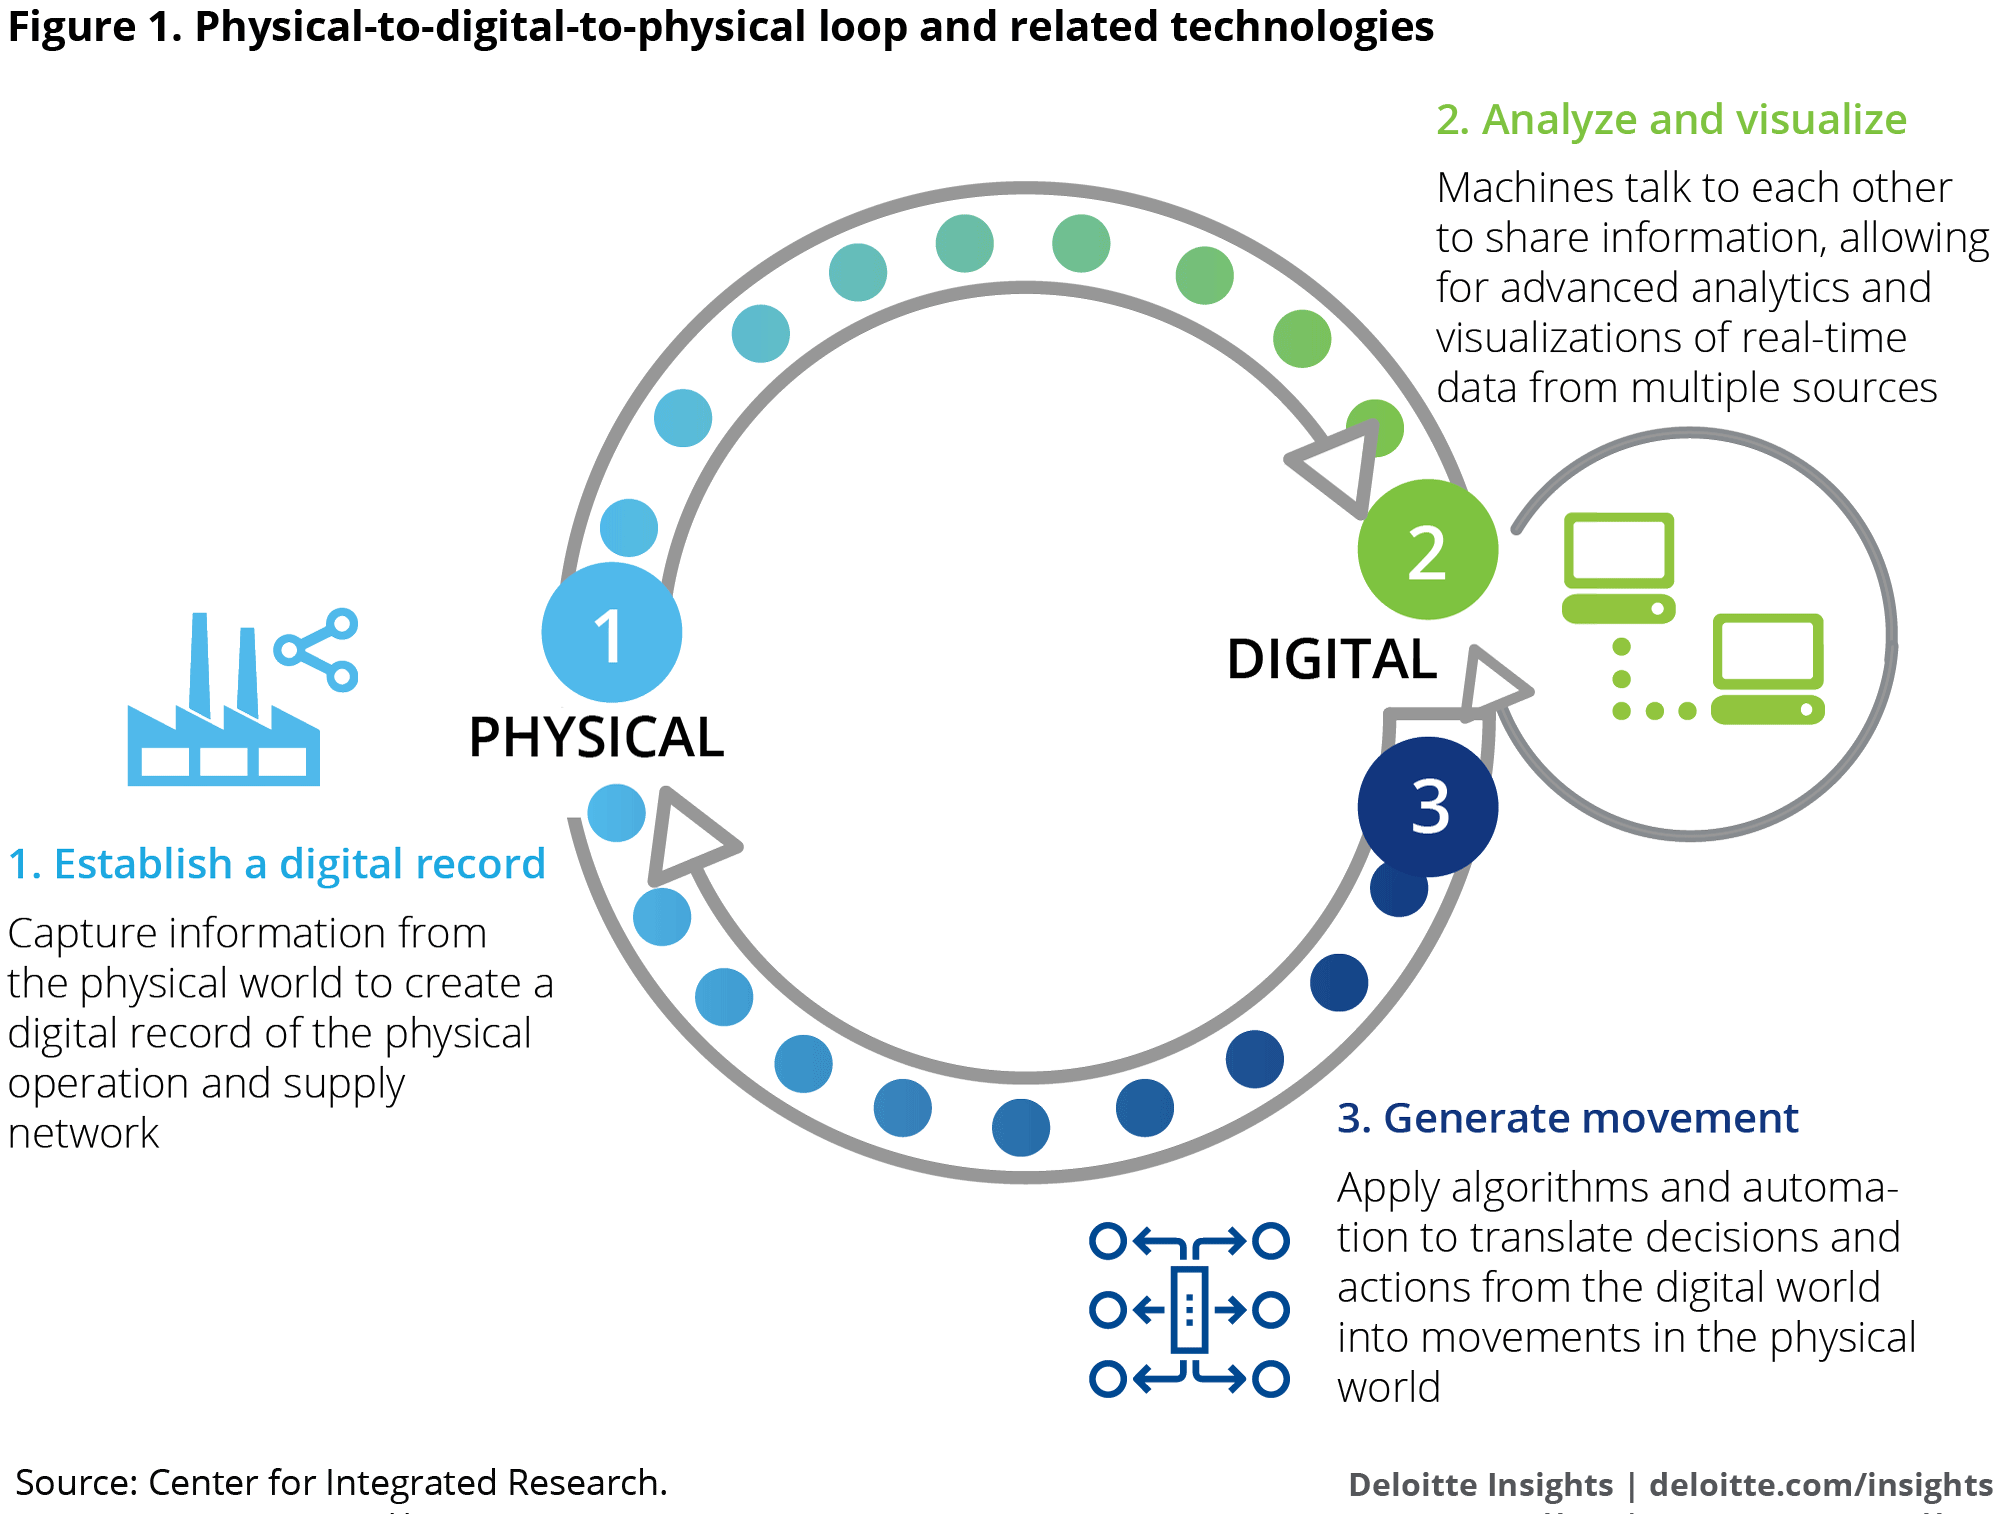 Physical-to-digital-to-physical loop and related technologies